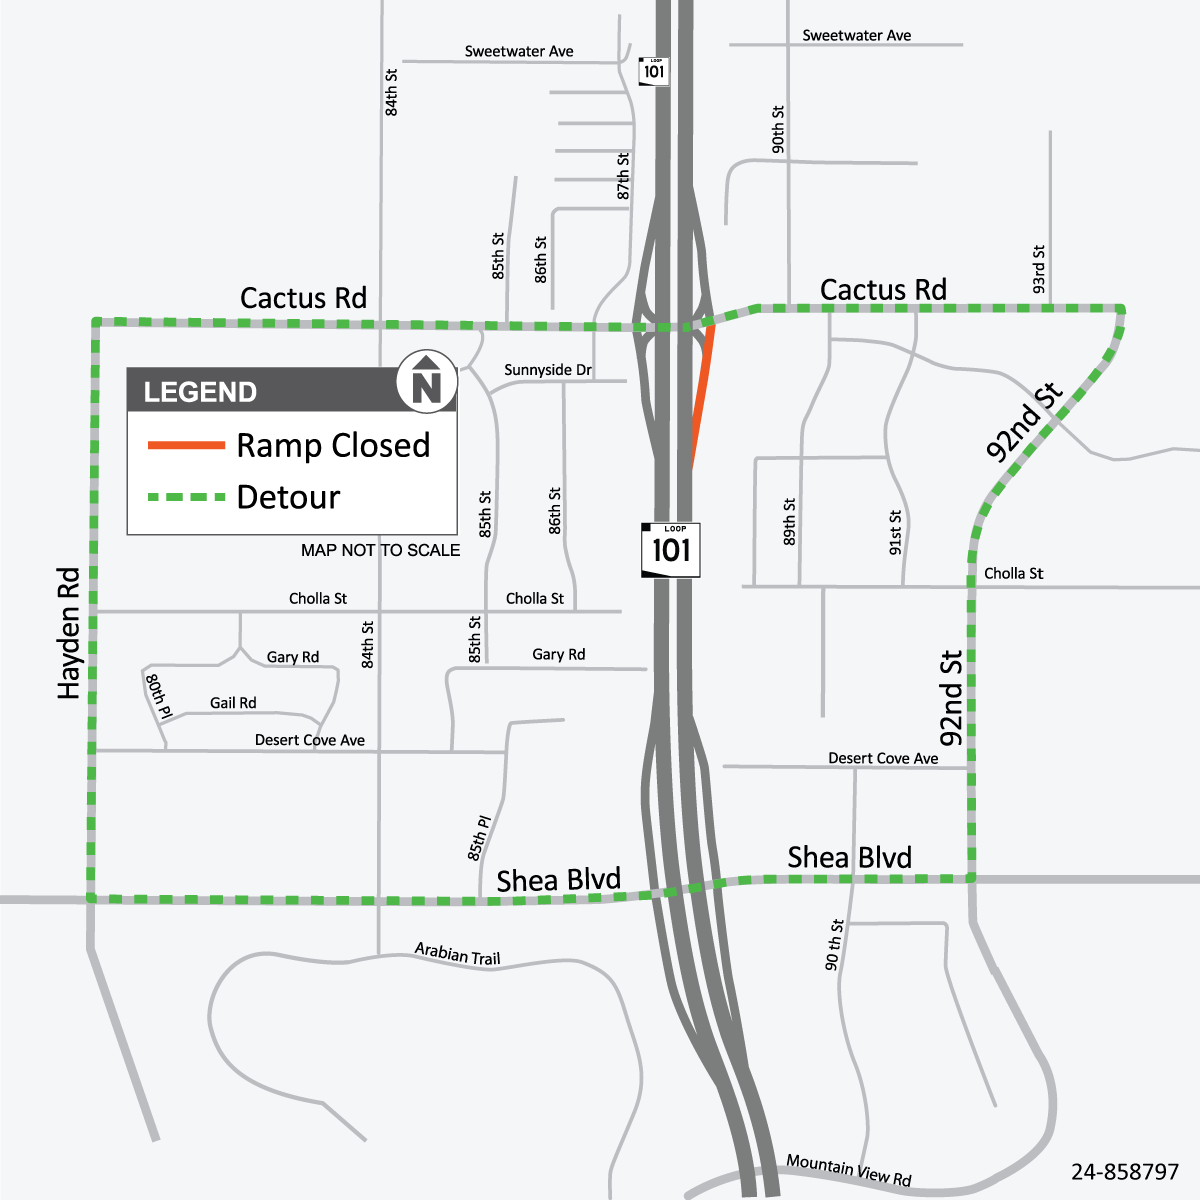 Map of planned closure of the northbound Loop 101 off-ramp at Cactus Road with detours